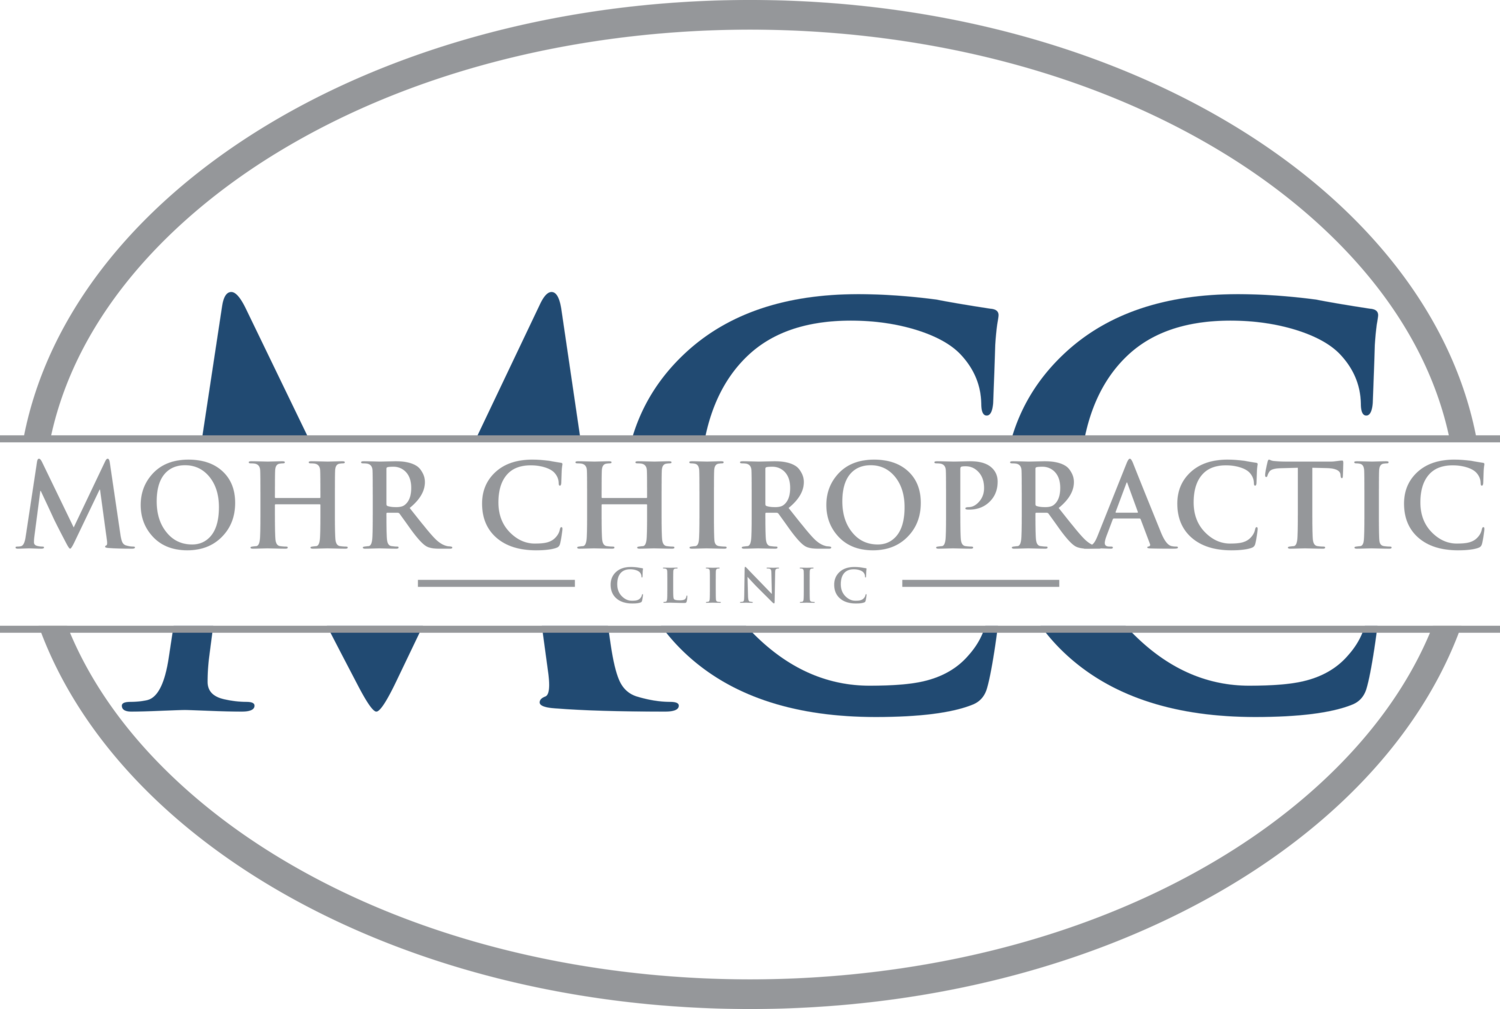 Mohr Chiropractic Clinic